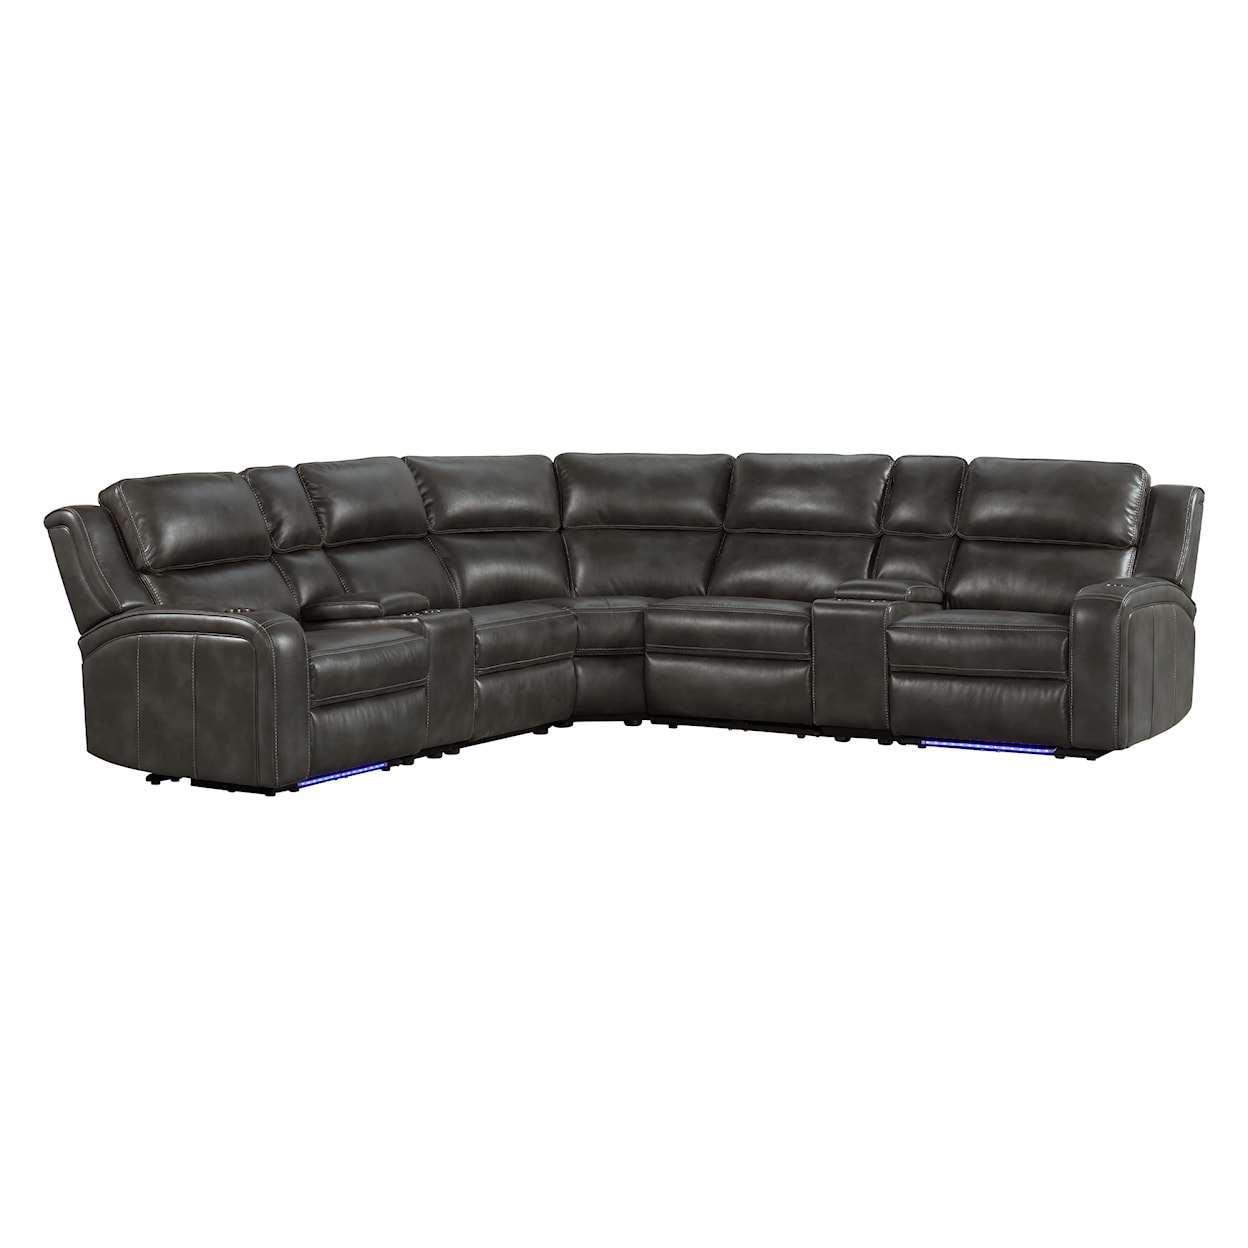 Intercon Silhouette 7-Piece Sectional